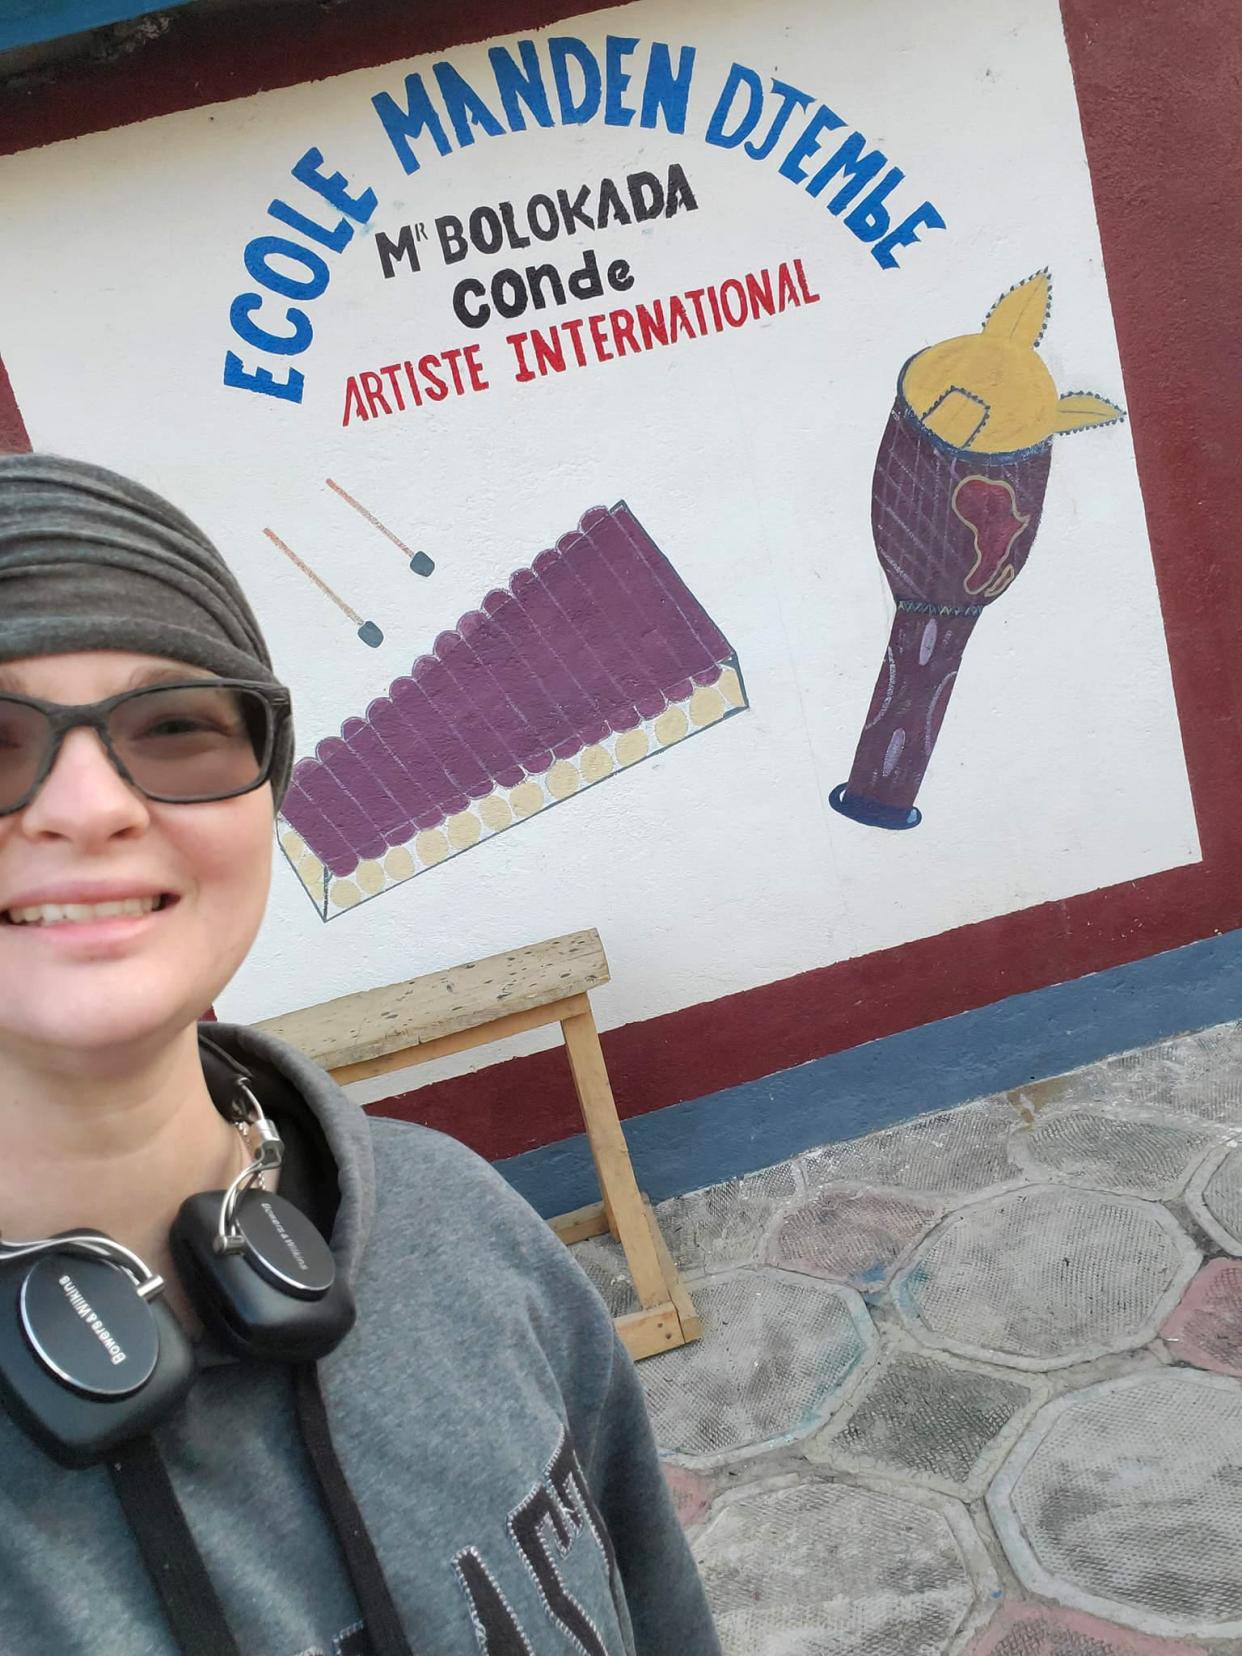 Stephanie Mason, a member of the Staunton School Board, recently returned from a month-long trip to Africa to study West Africa drum and dance. She hopes to use some of what she learned to help teach students in Staunton City Schools.